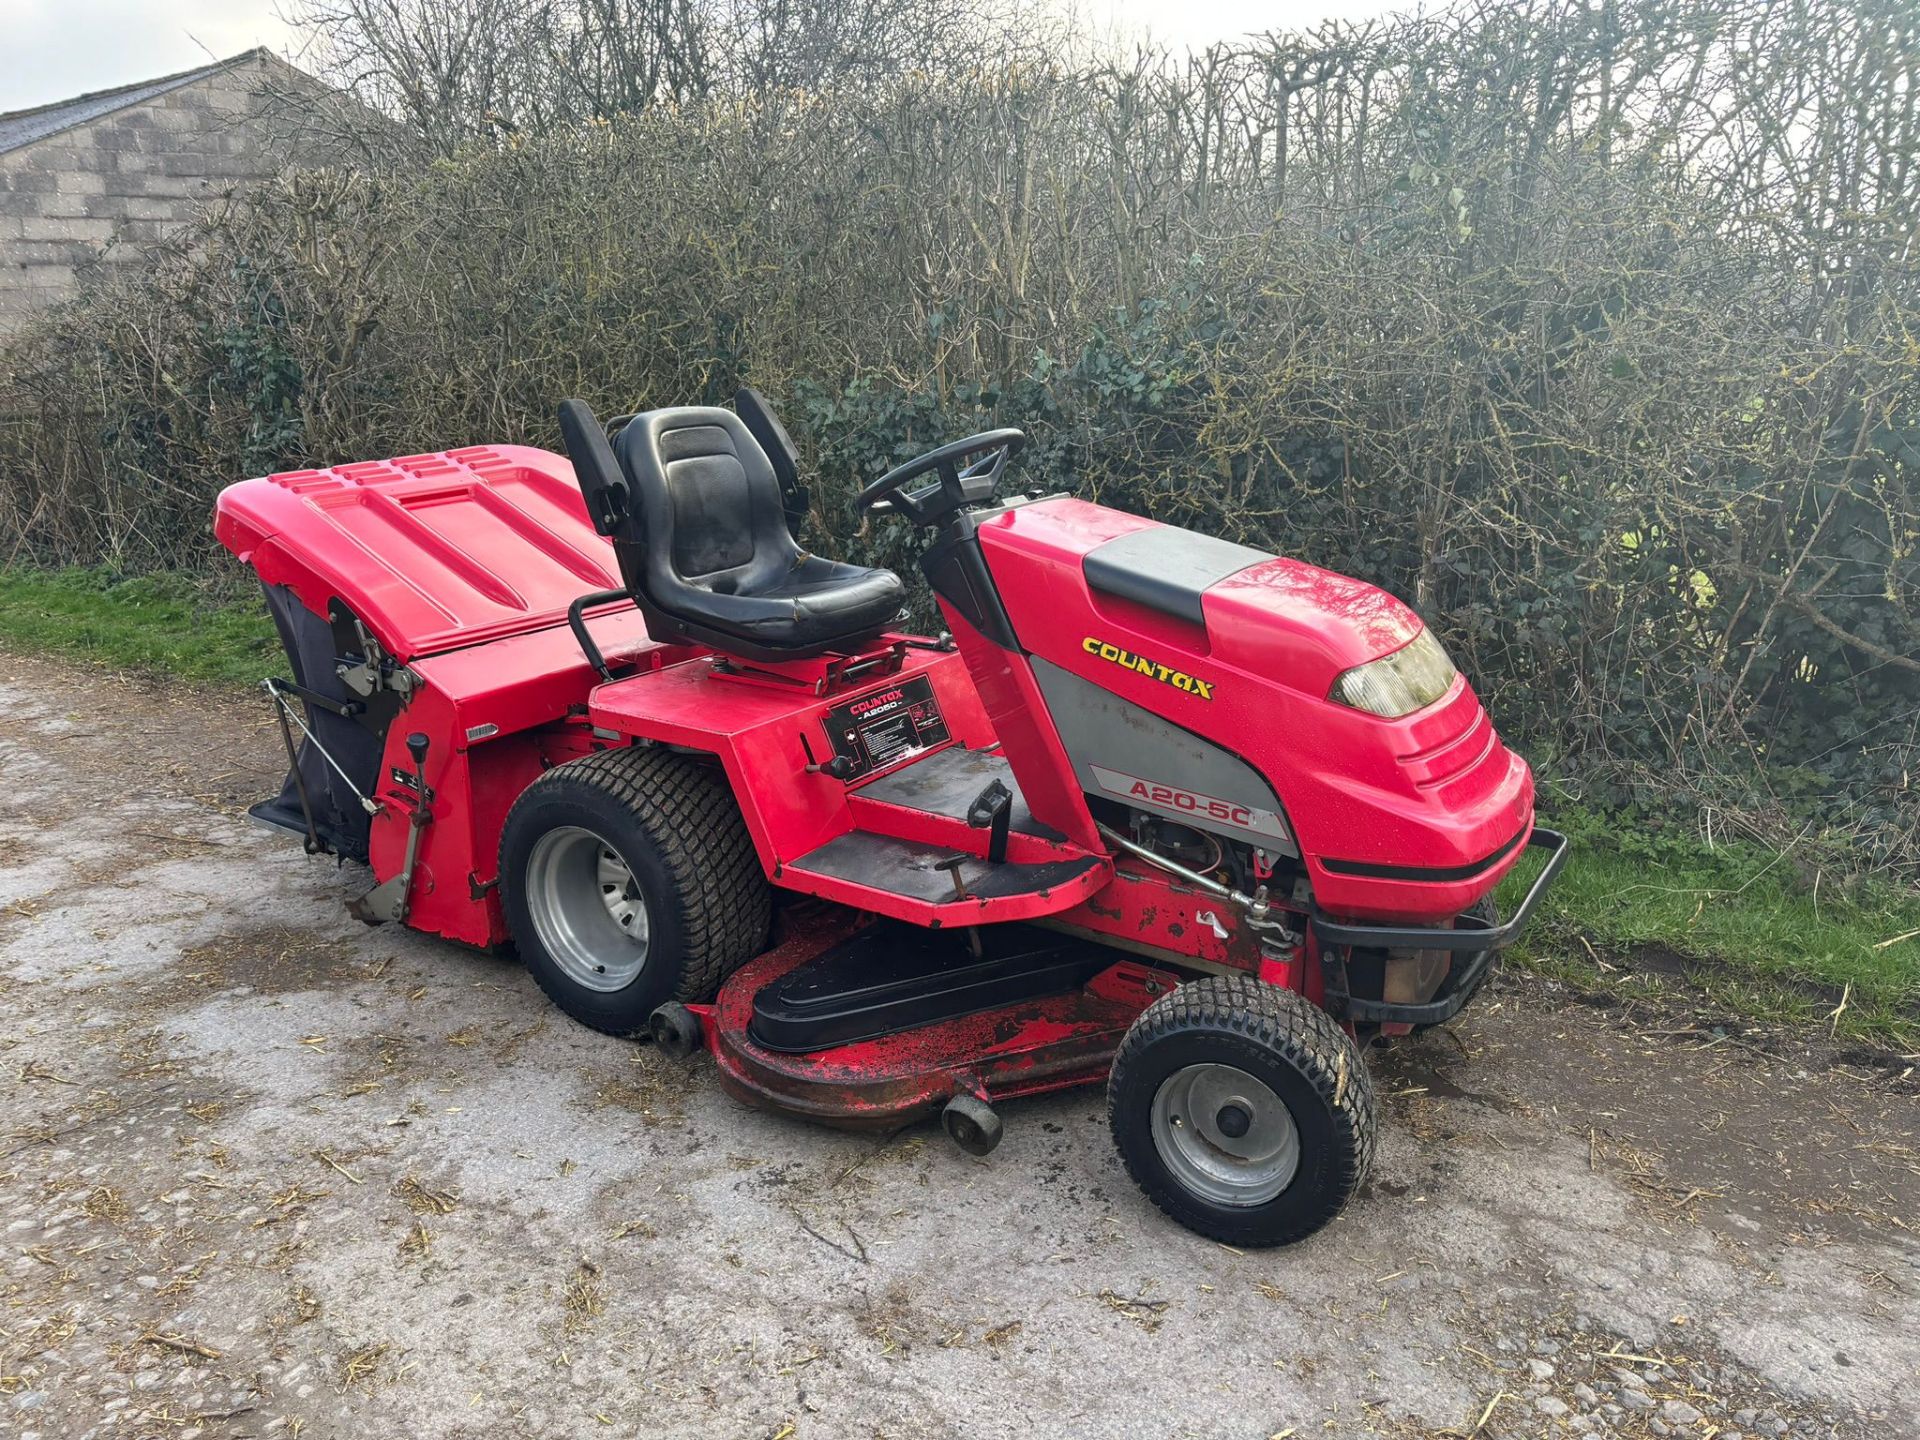 Countax A20/50 Ride On Lawn Mower *PLUS VAT*